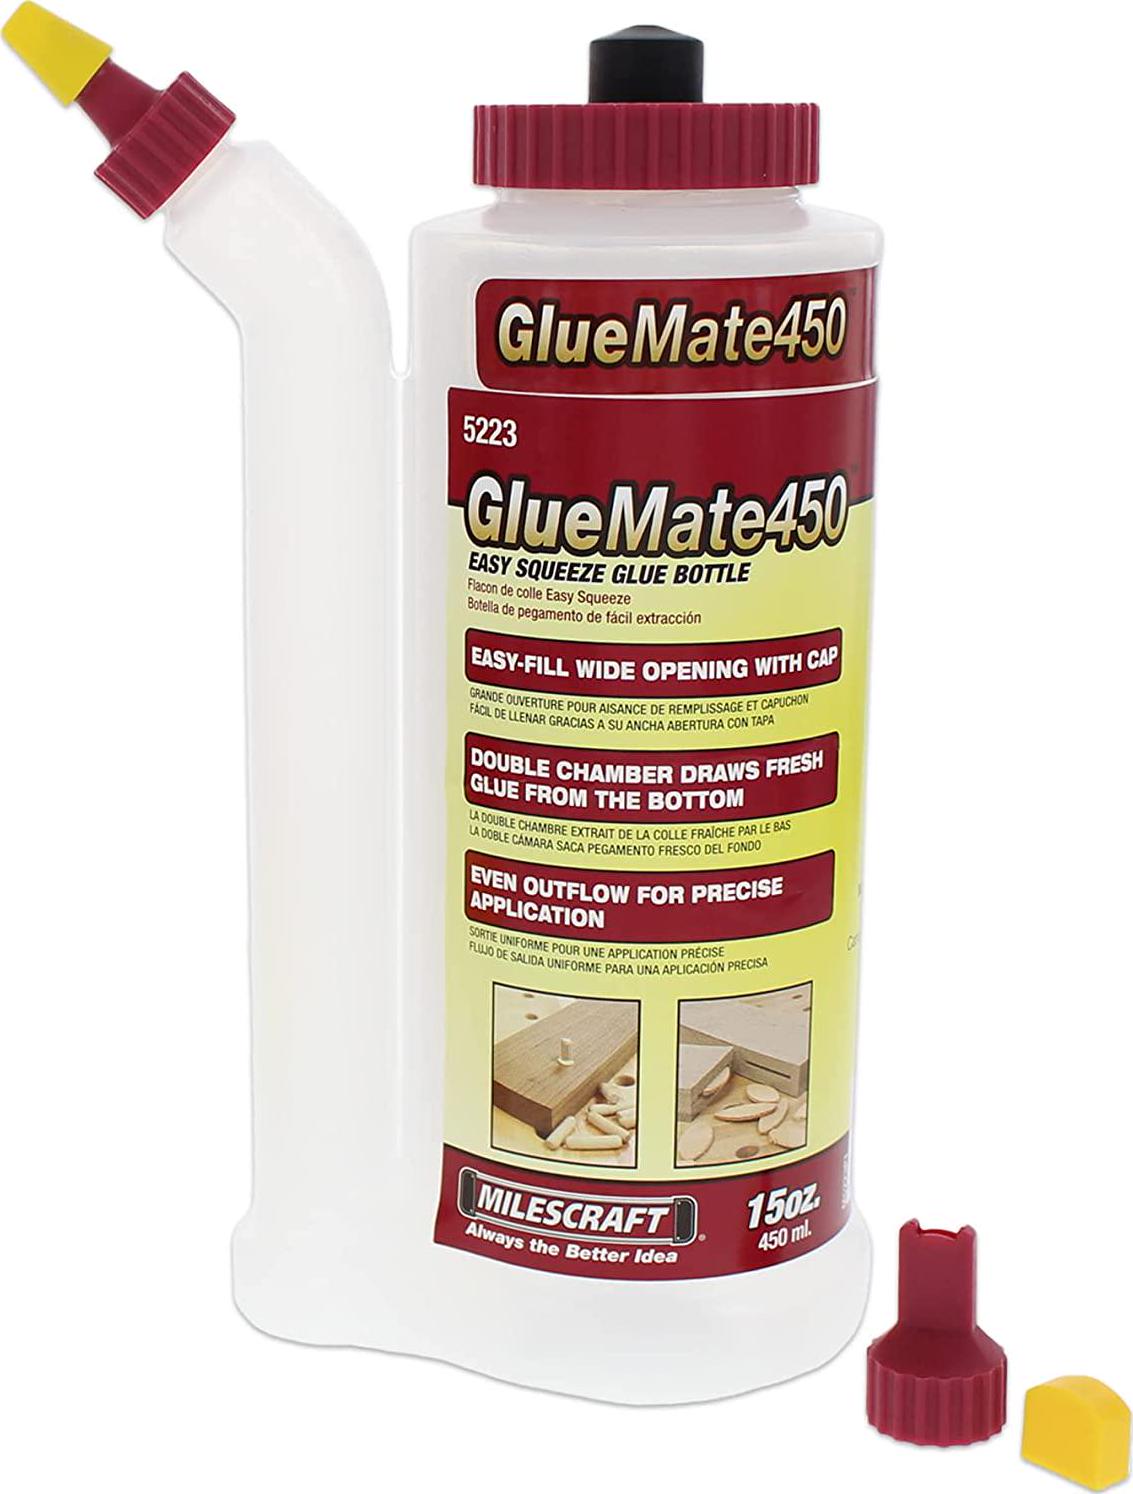 Milescraft, Milescraft 5223 Glue Mate 450-15oz. (450ml) Precision Wood Glue Bottle - Anti-Drip - Dowel and Biscuit Tips Included - Easy Flow Multi-Chamber Design - Ideal for Woodworking